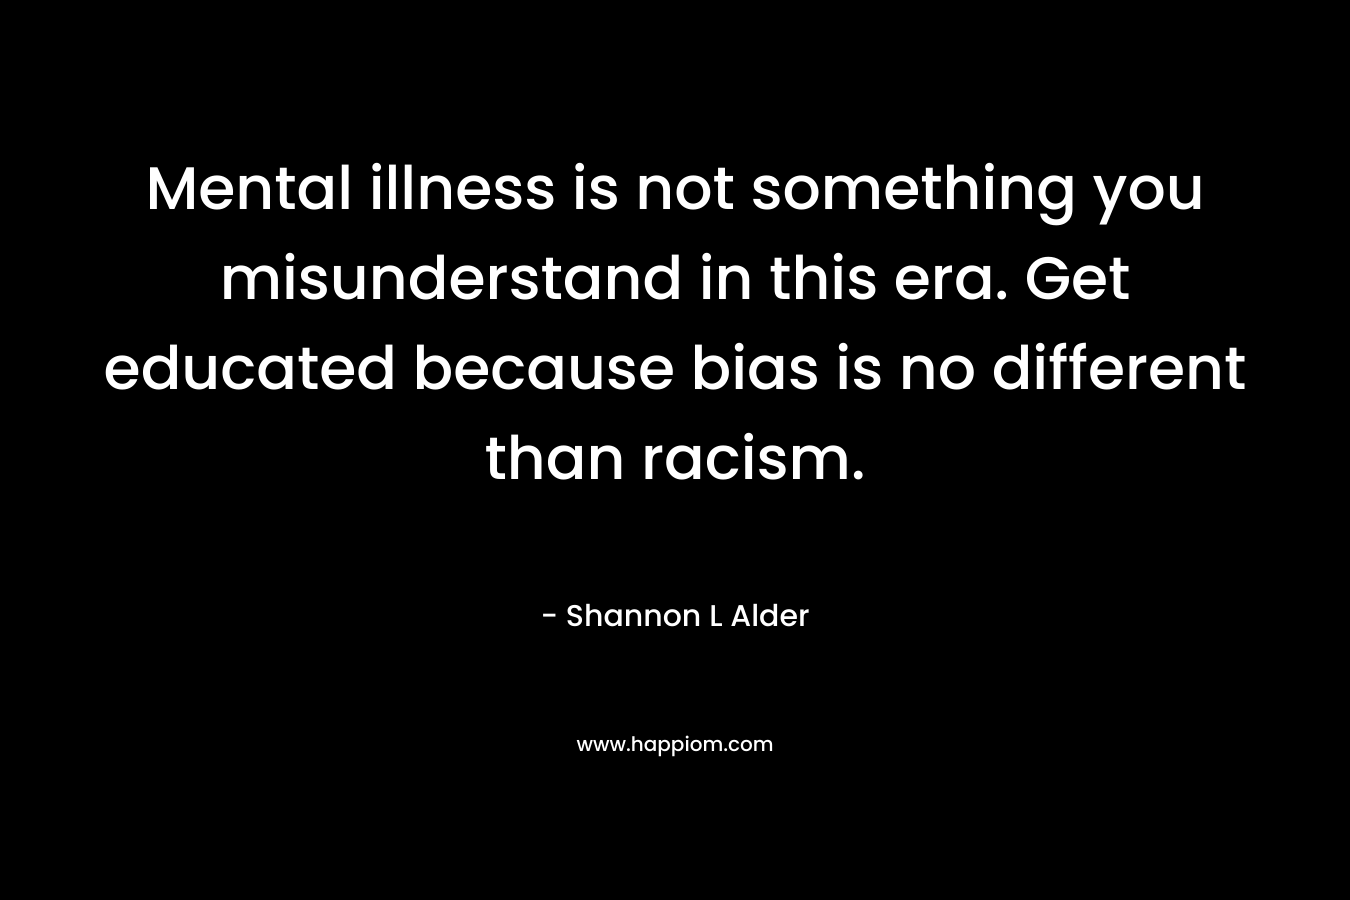 Mental illness is not something you misunderstand in this era. Get educated because bias is no different than racism. – Shannon L Alder